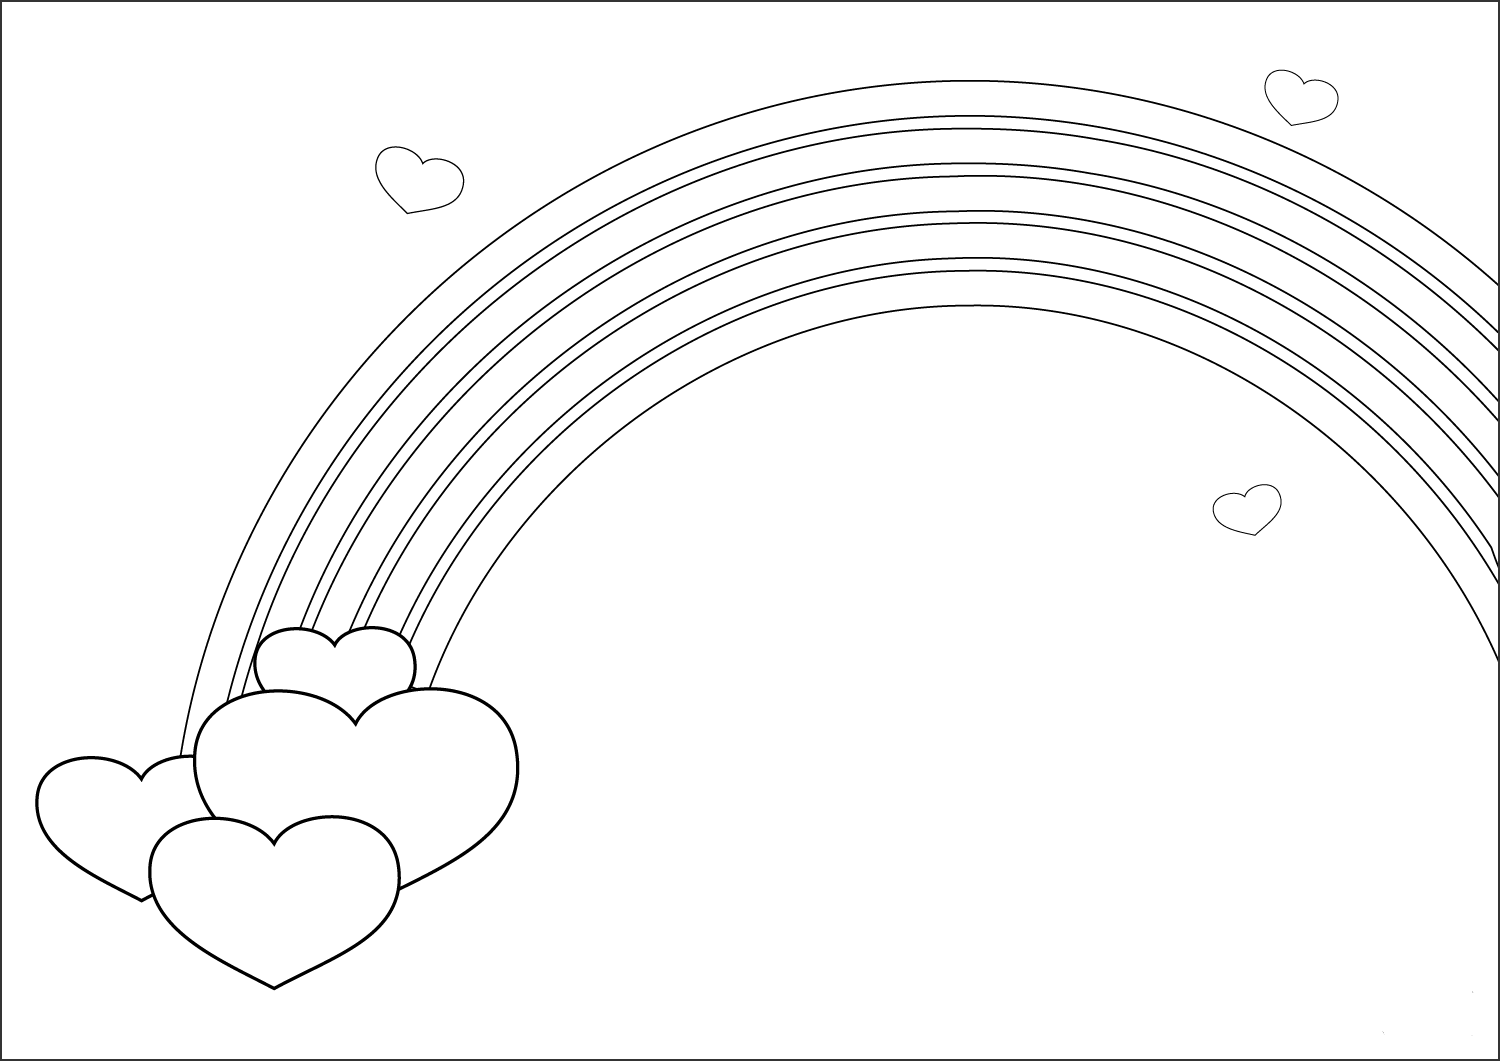 Rainbow with hearts coloring page